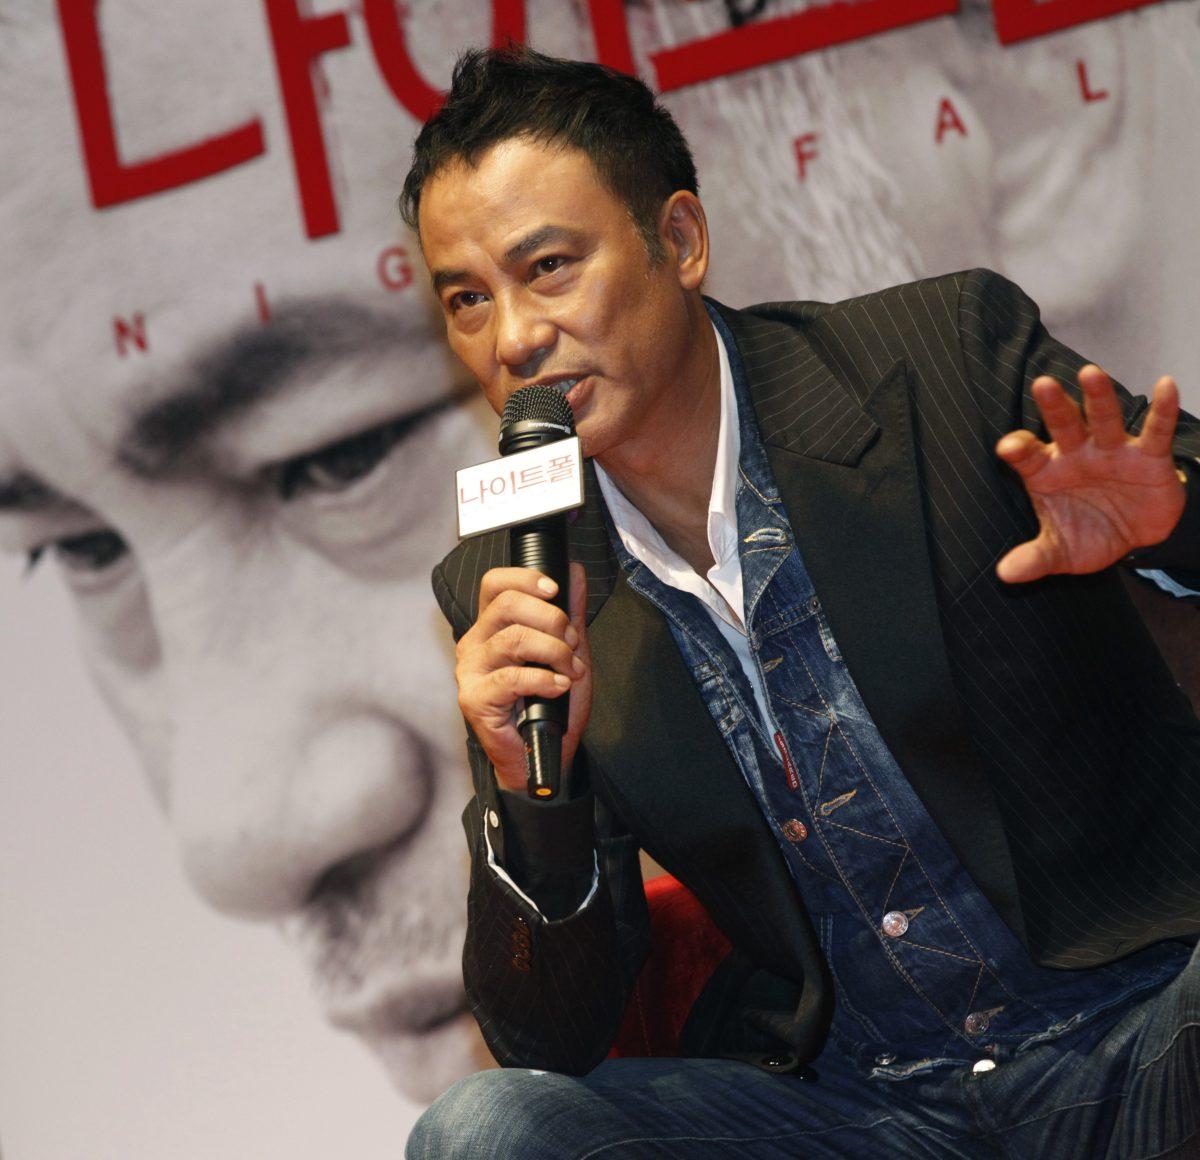 Hong Kong actor Simon Yam speaks during a news conference to promote his movie "Nightfall" in Seoul, South Korea, on Sept. 12, 2012. (Lee Jae-Won/Reuters)